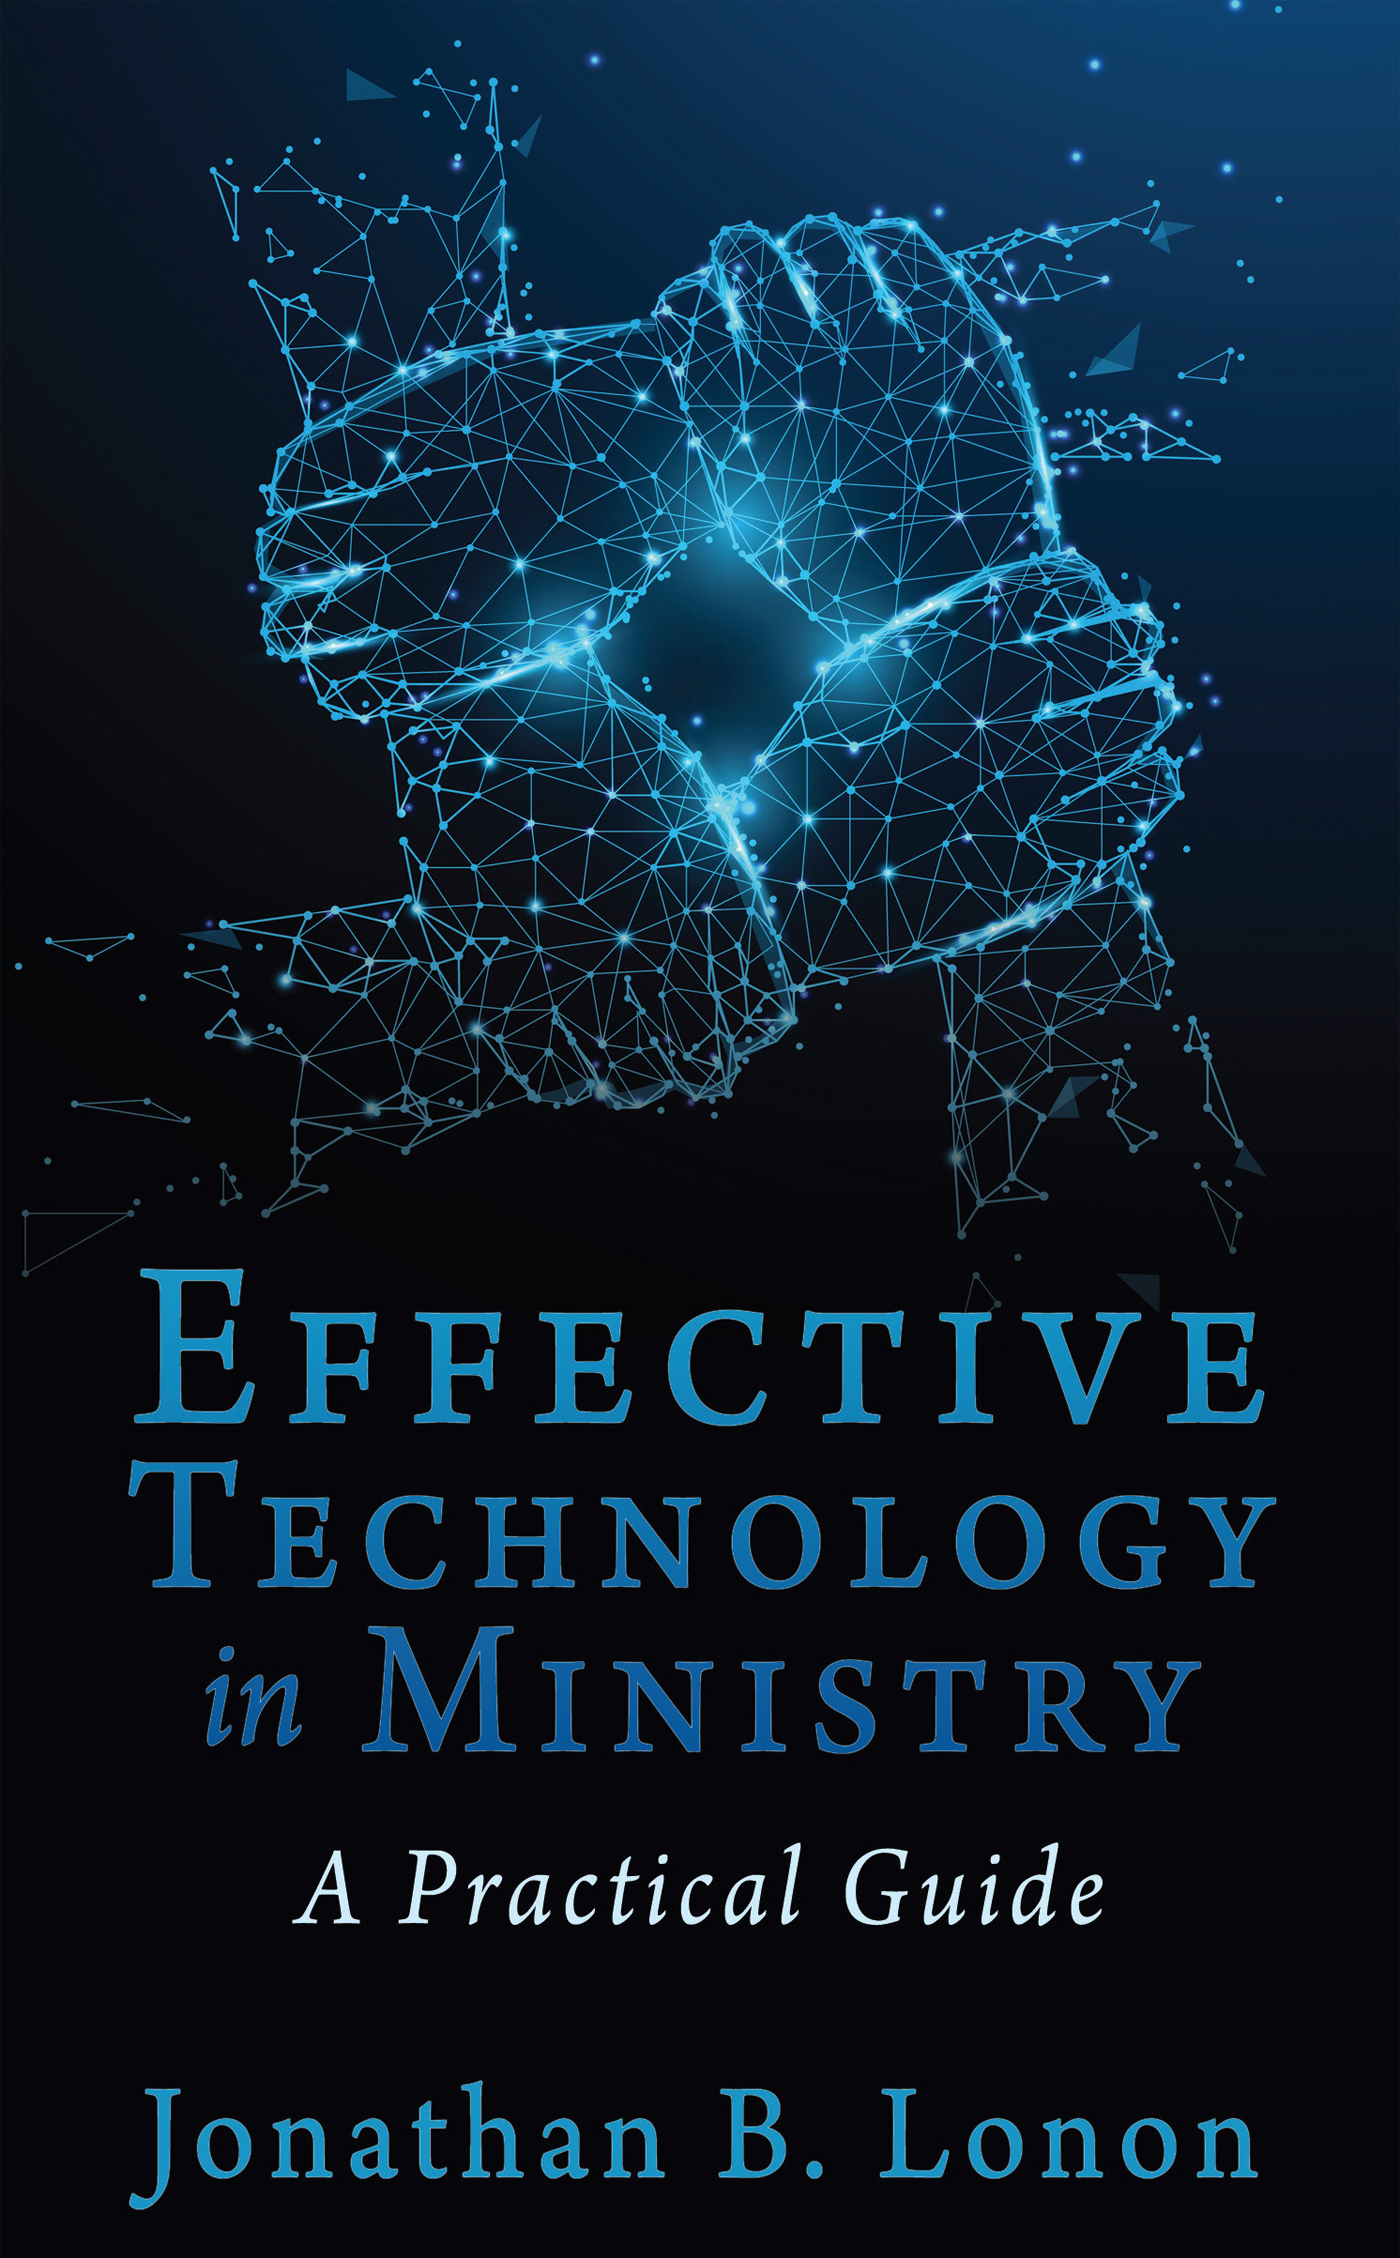 Cover image of the book, "Effective Technology in Ministry: A Practical Guide", authored by the founder of The Church Tech Club, Jonathan Lonon.